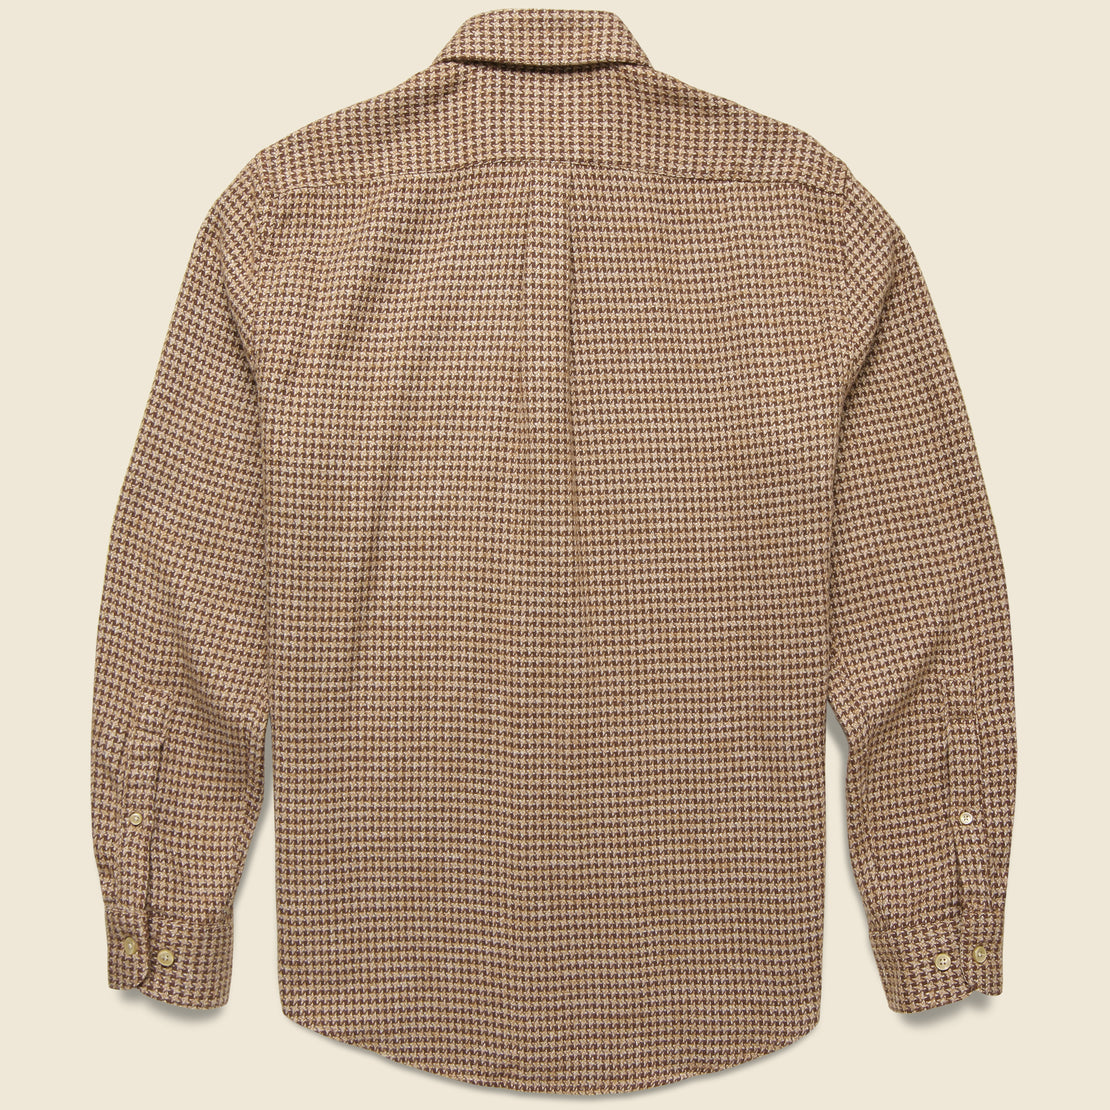 Pied Poule Shirt - Brown - Portuguese Flannel - STAG Provisions - Tops - L/S Woven - Other Pattern